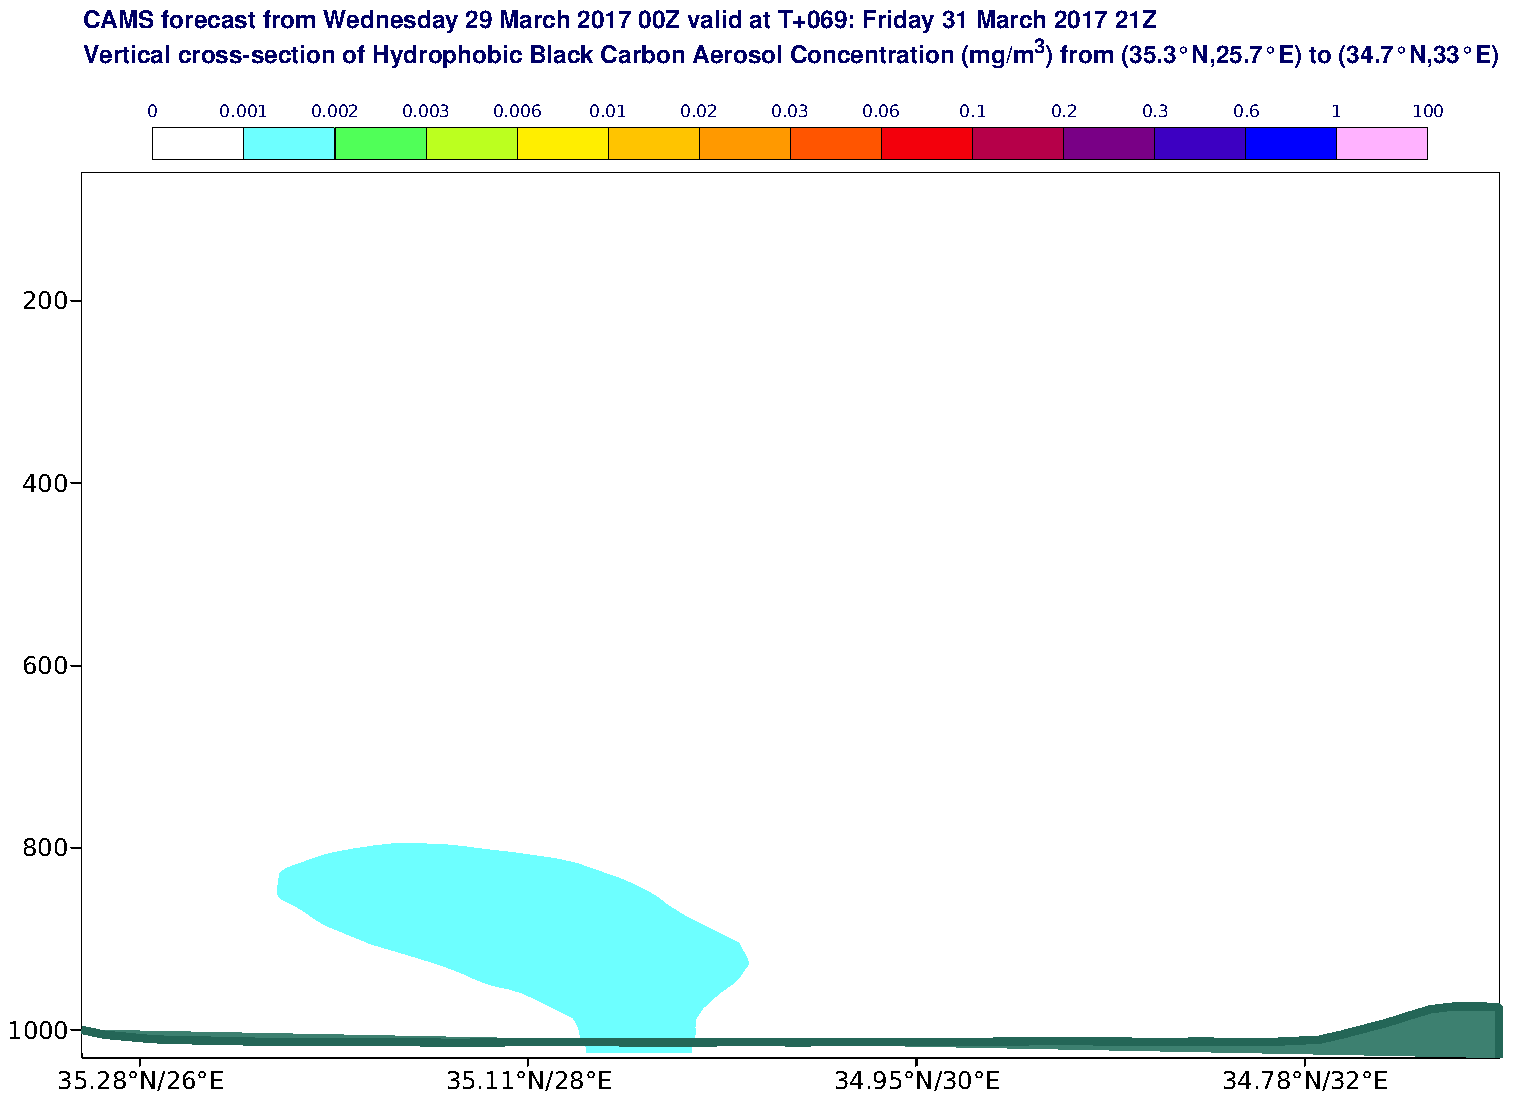 Vertical cross-section of Hydrophobic Black Carbon Aerosol Concentration (mg/m3) valid at T69 - 2017-03-31 21:00